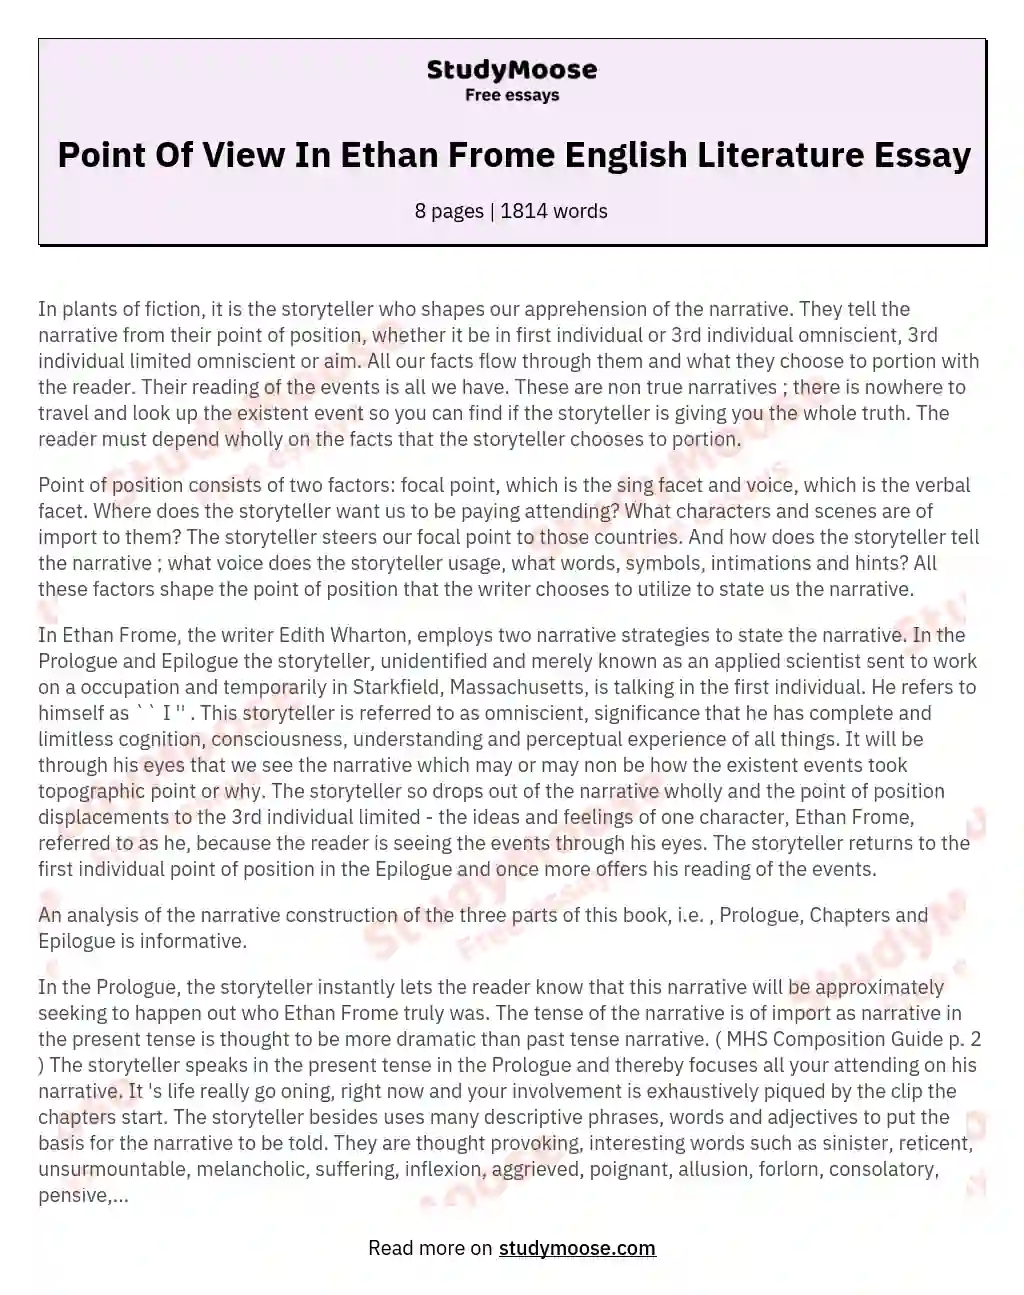 Point Of View In Ethan Frome English Literature Essay essay